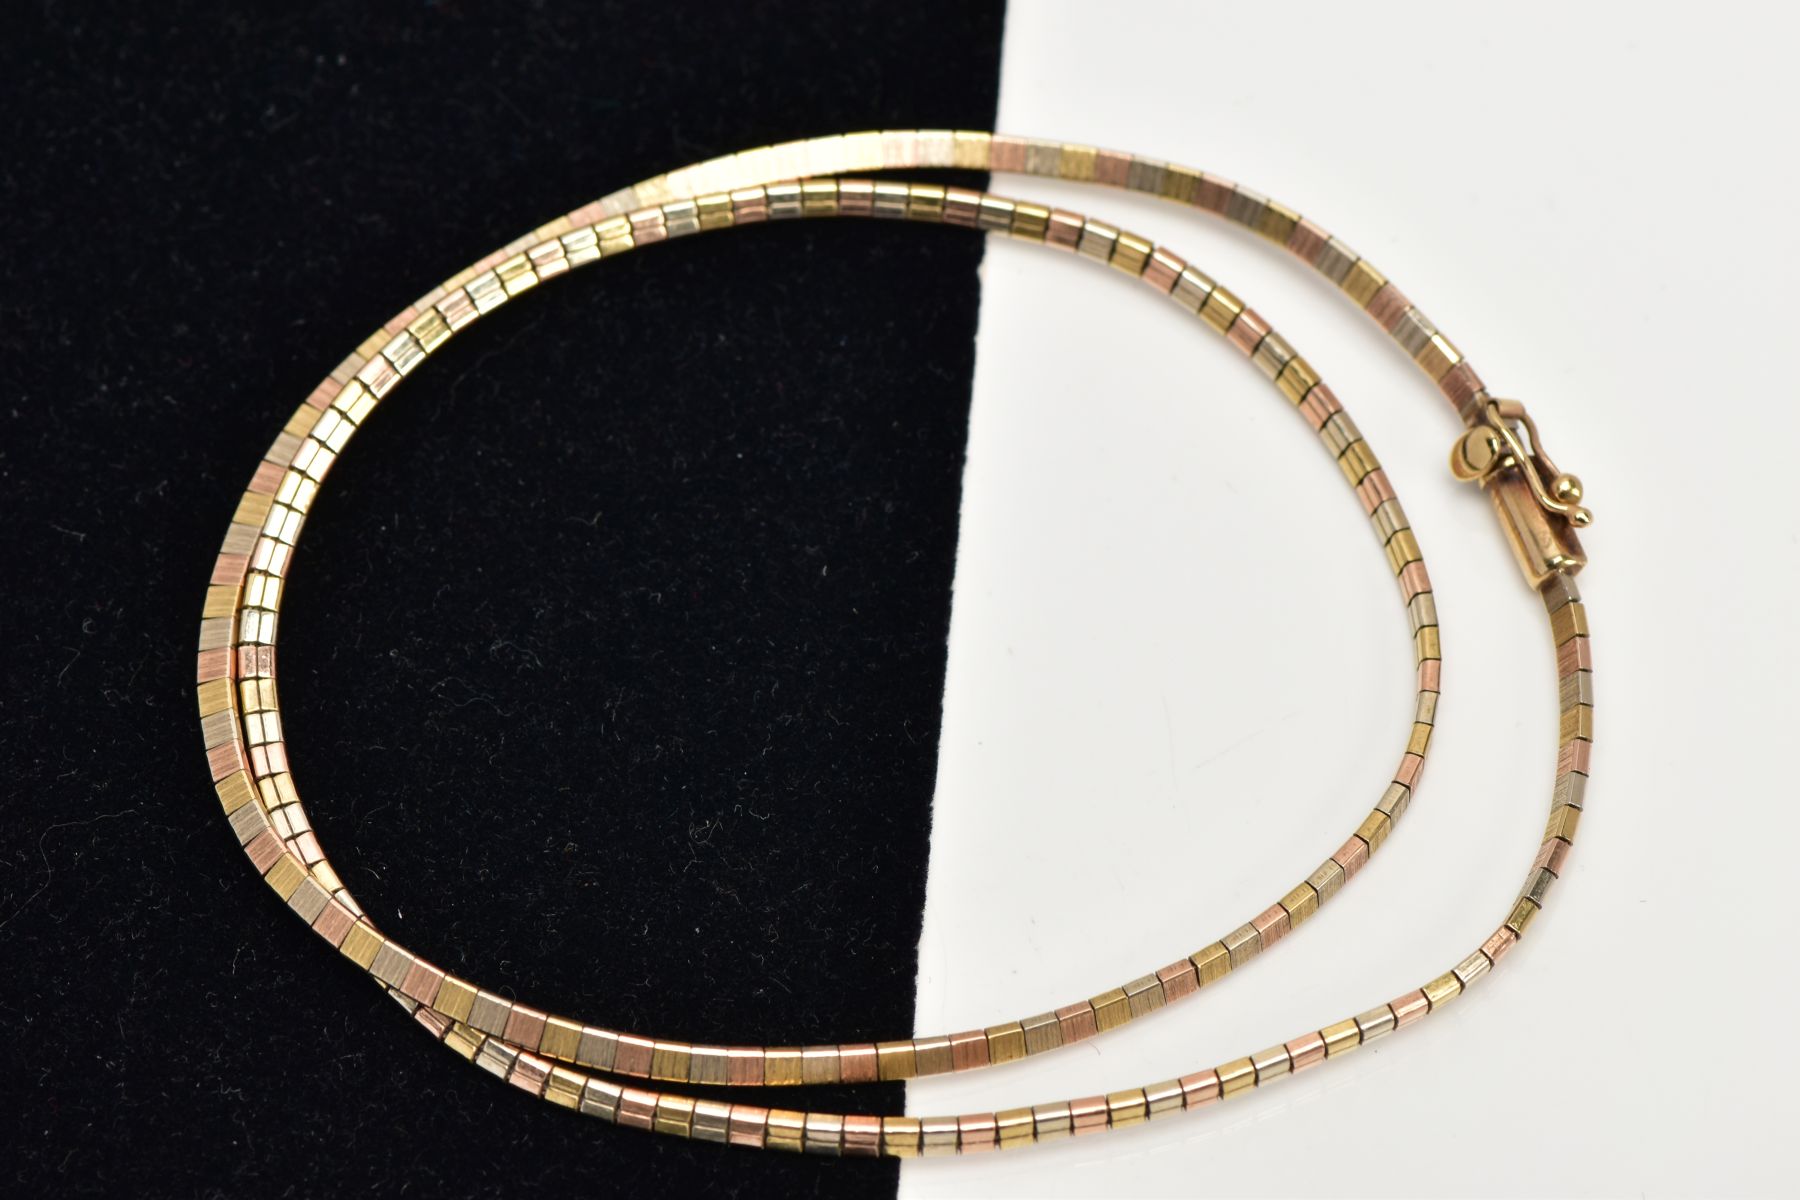 A 9CT TRI-COLOURED GOLD CHAIN, yellow, white and rose gold square articulated links, fitted with